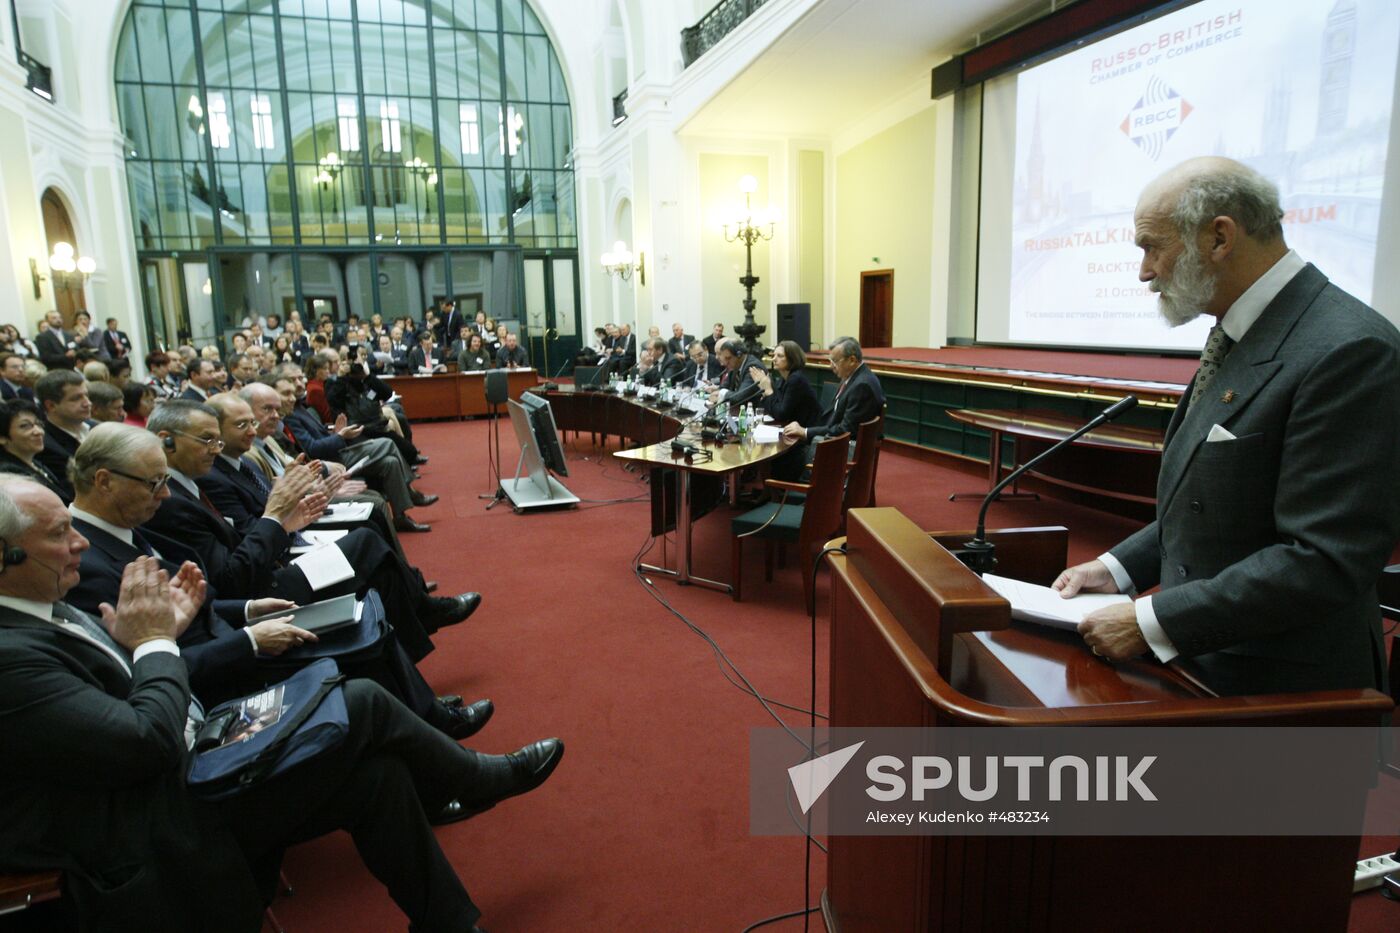 RussiaTALK Moscow Investment Forum